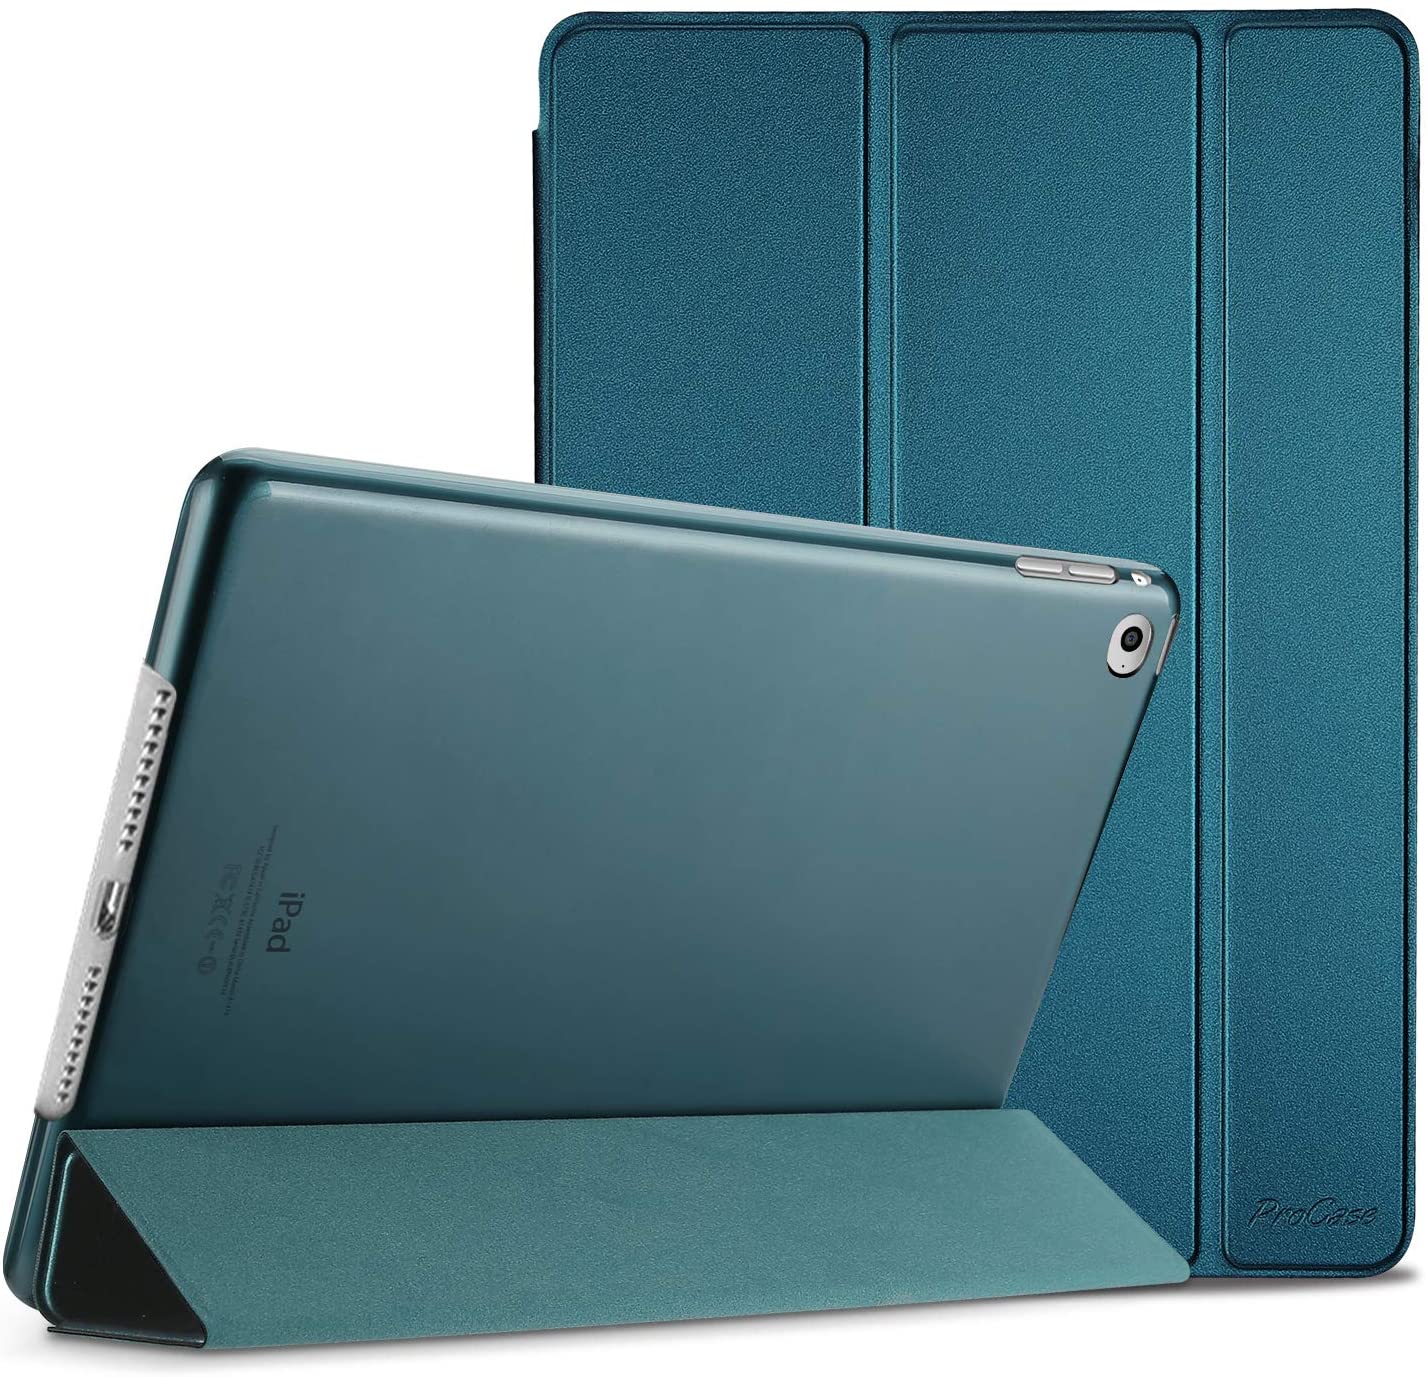 iPad Air 2 2014 Release Edition Slim Case | ProCase teal